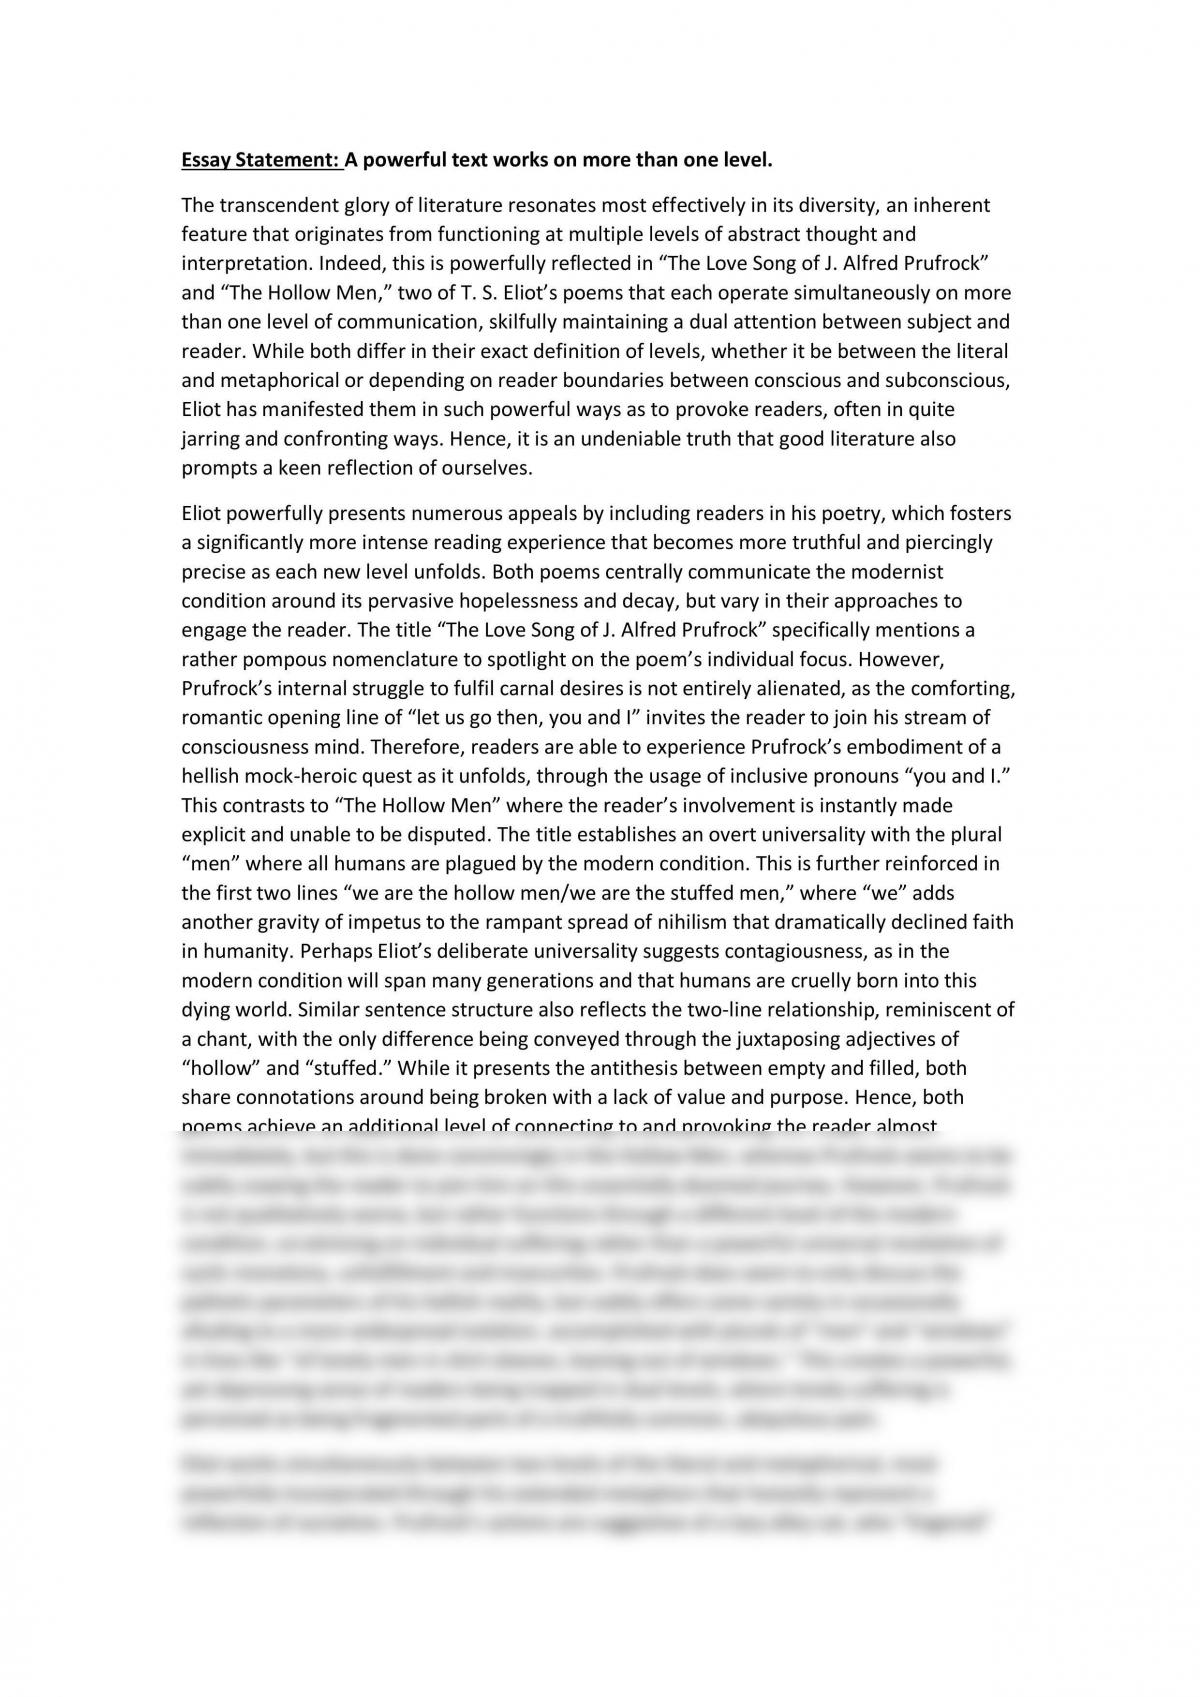 Level 3 Written text essay on two T.S.Eliot poems - Page 1